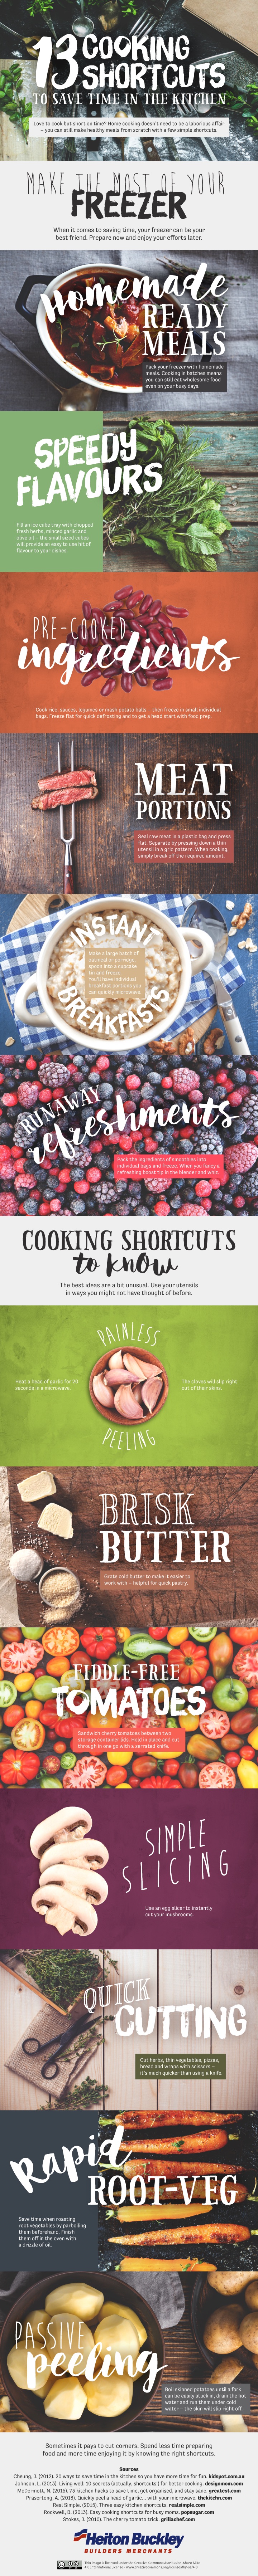 13-cooking-shortcuts-to-save-time-in-the-kitchen